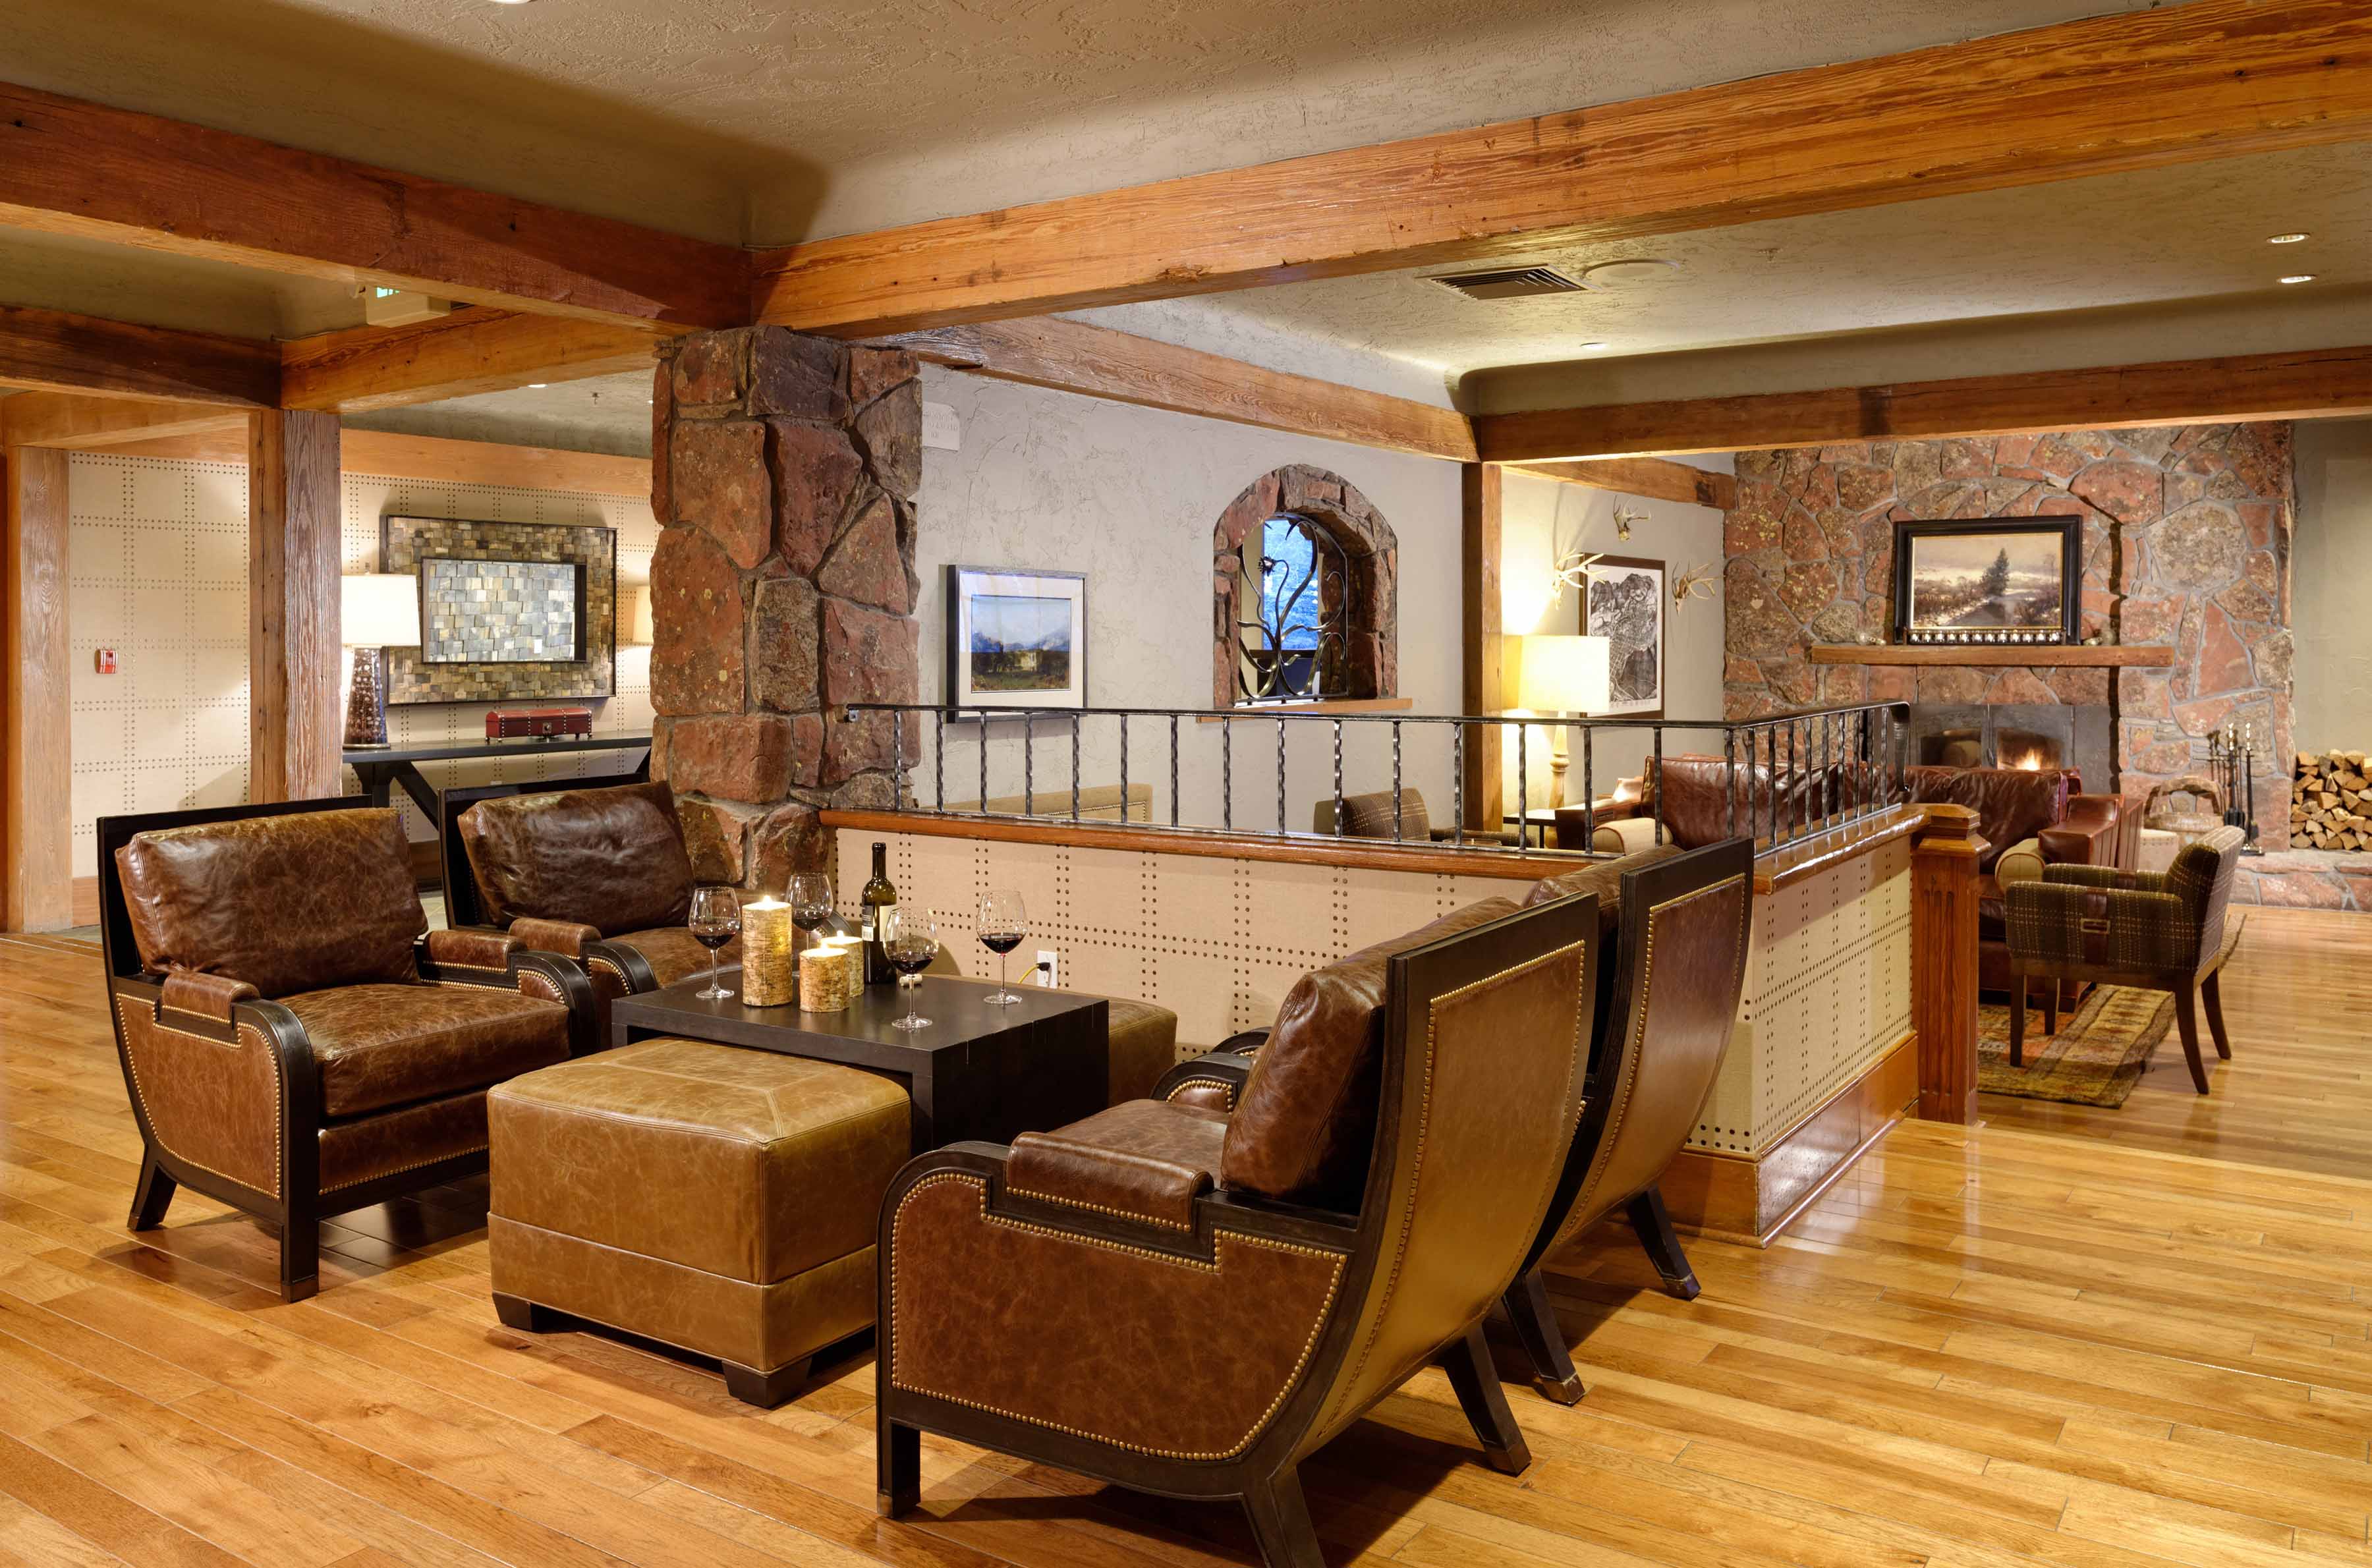 snowmass club interior design project by Patche Pratt of the J Banks Design Group has a mountain-inspired vibe